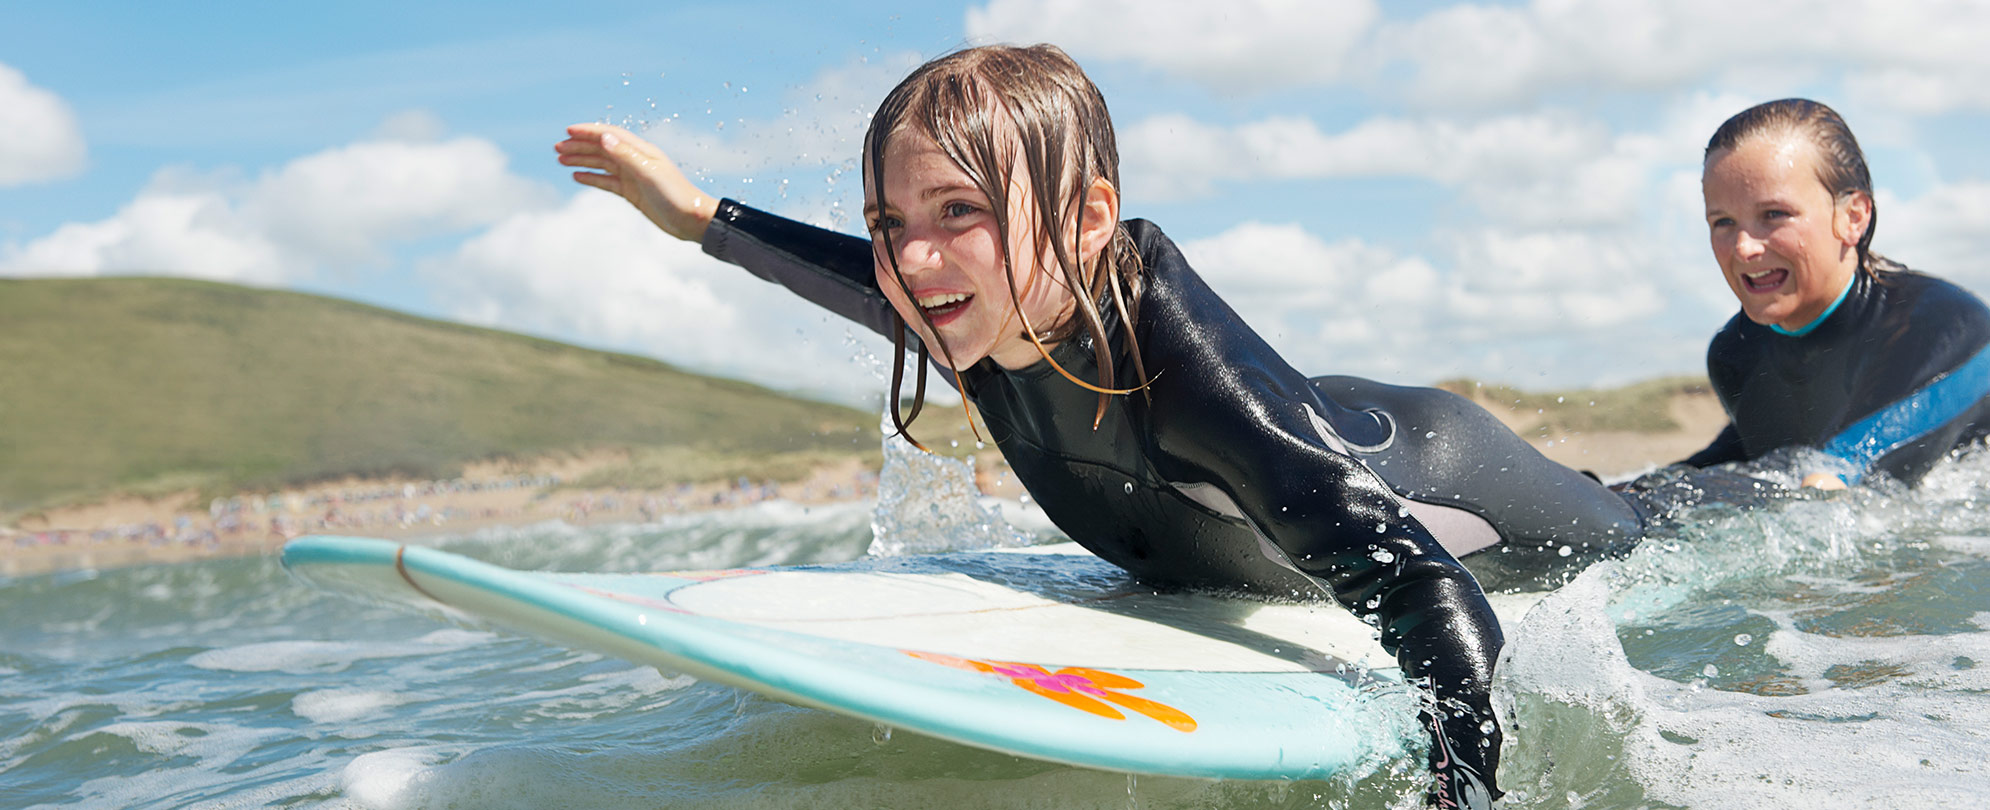 A young kid wearing a wetsuit paddles on a surfboard as a woman pushes the board into a wave.